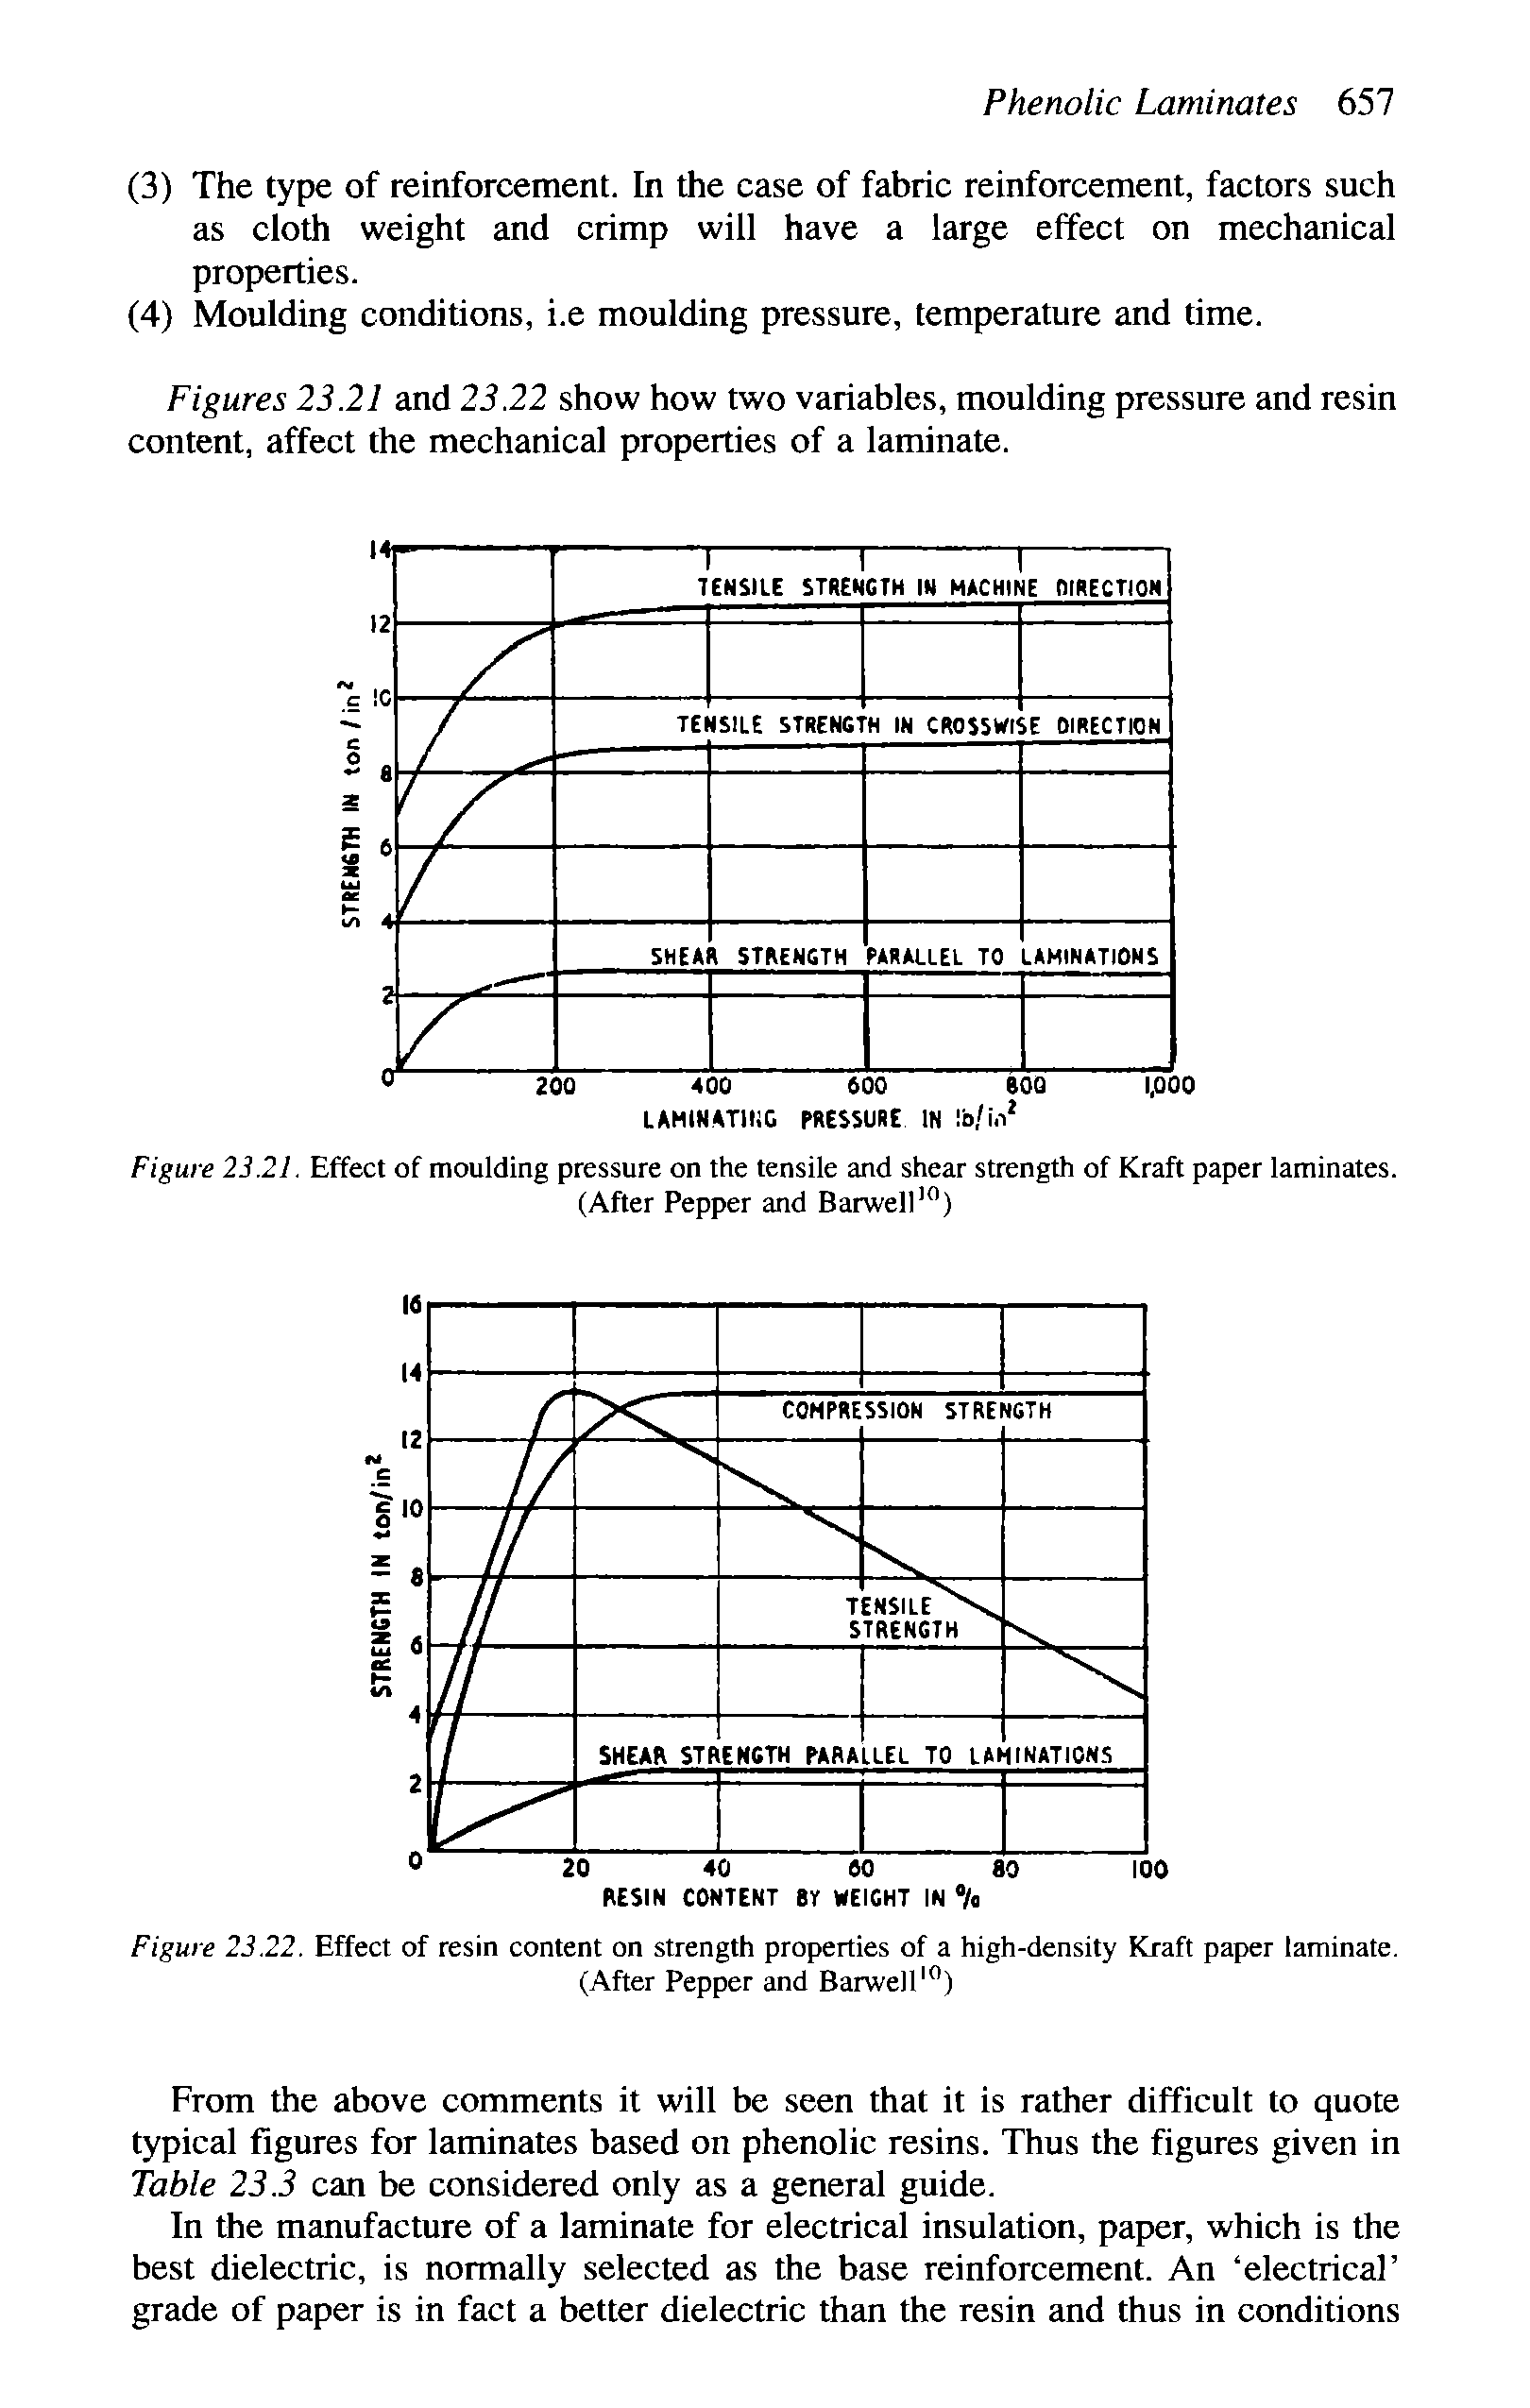 Figure 23.21. Effect of moulding pressure on the tensile and shear strength of Kraft paper laminates.